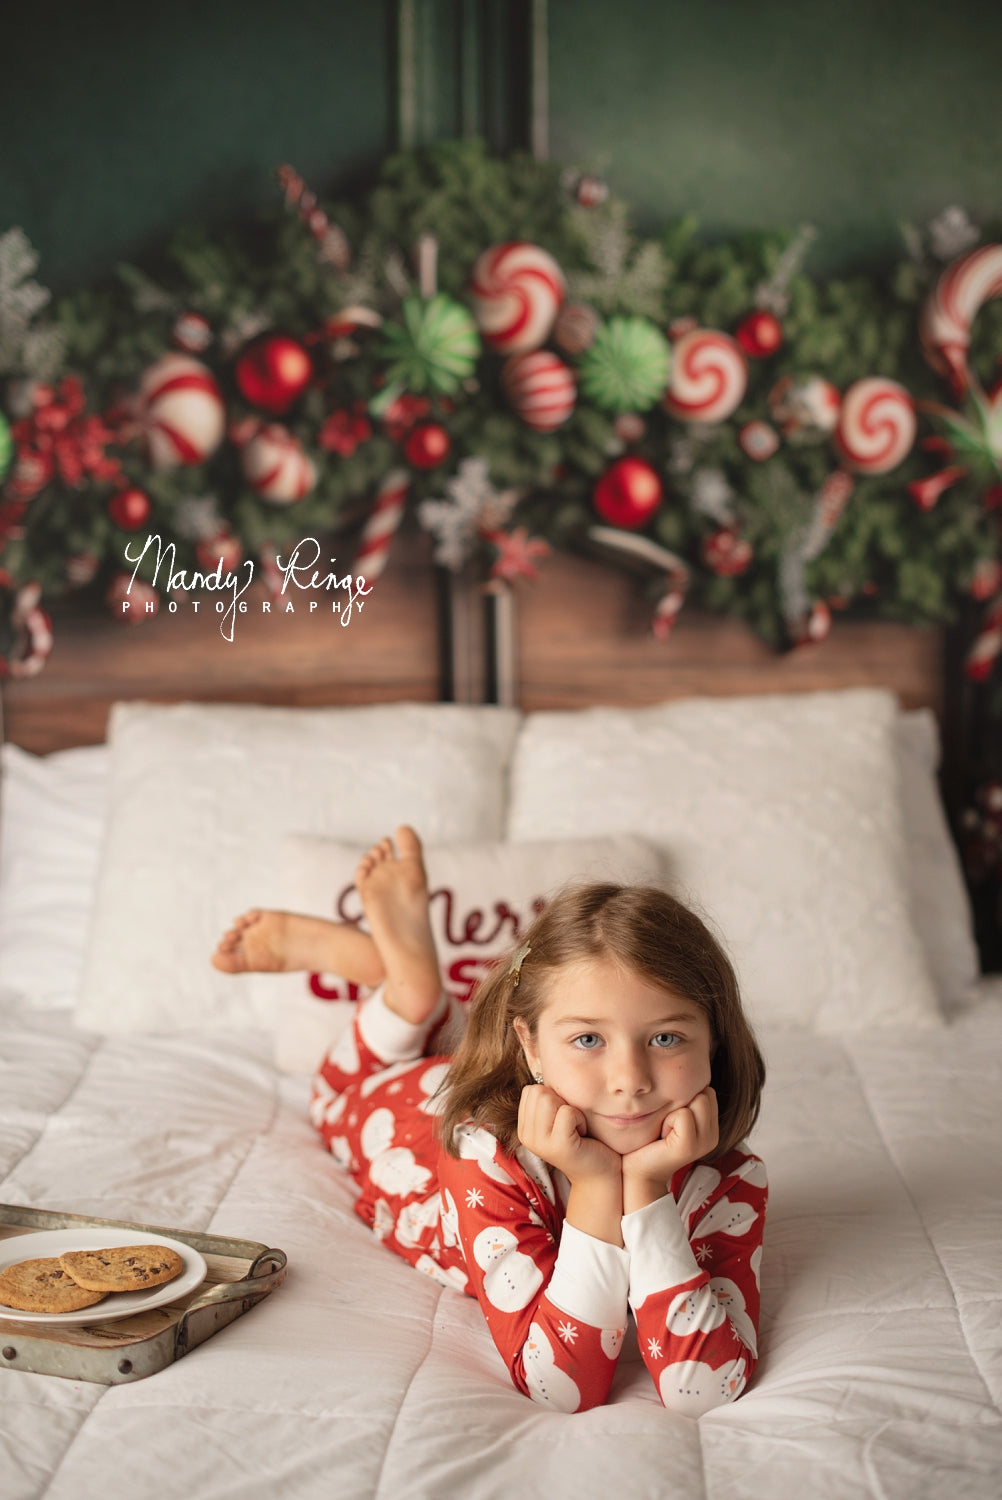 Kate Green Christmas Headboard Backdrop Candy Cane Designed by Mandy Ringe Photography